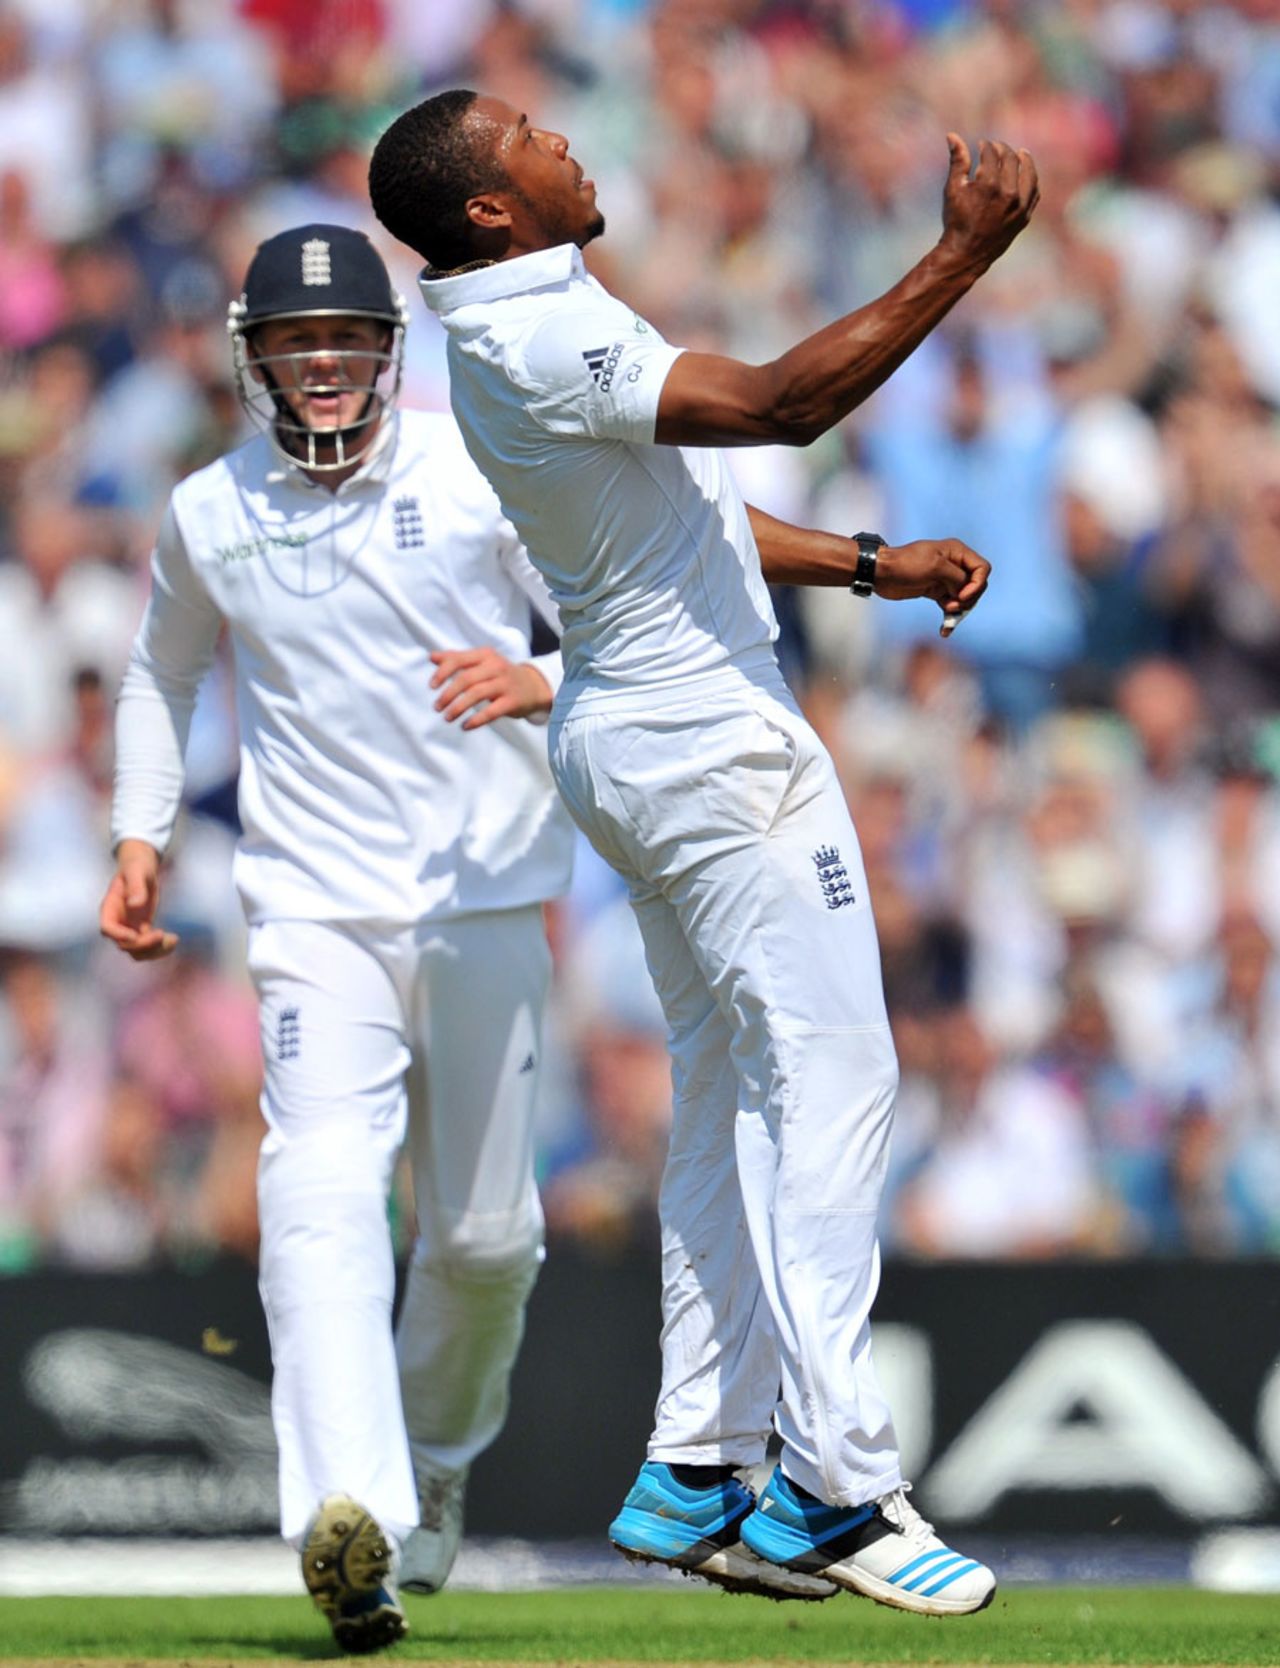 Chris Jordan is elated after catching Ajinkya Rahane off his own bowling, England v India, 5th Investec Test, The Oval, 1st day, August 15, 2014